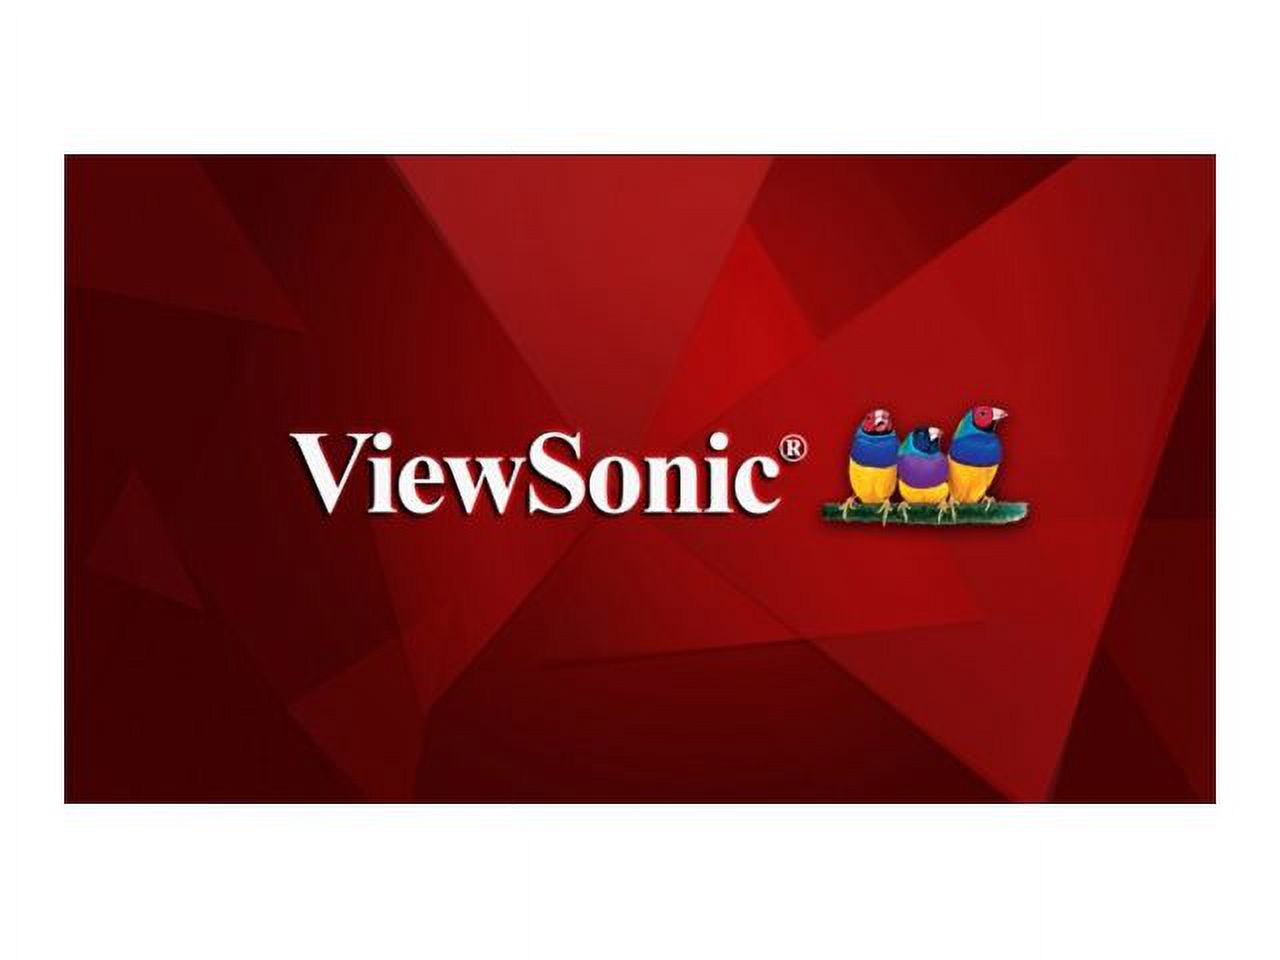 ViewSonic CDE6510 - 65" Diagonal Class (64.5" viewable) LED-backlit LCD display - digital signage - with built-in SoC media player - 4K UHD (2160p) 3840 x 2160 - direct-lit LED - image 1 of 7